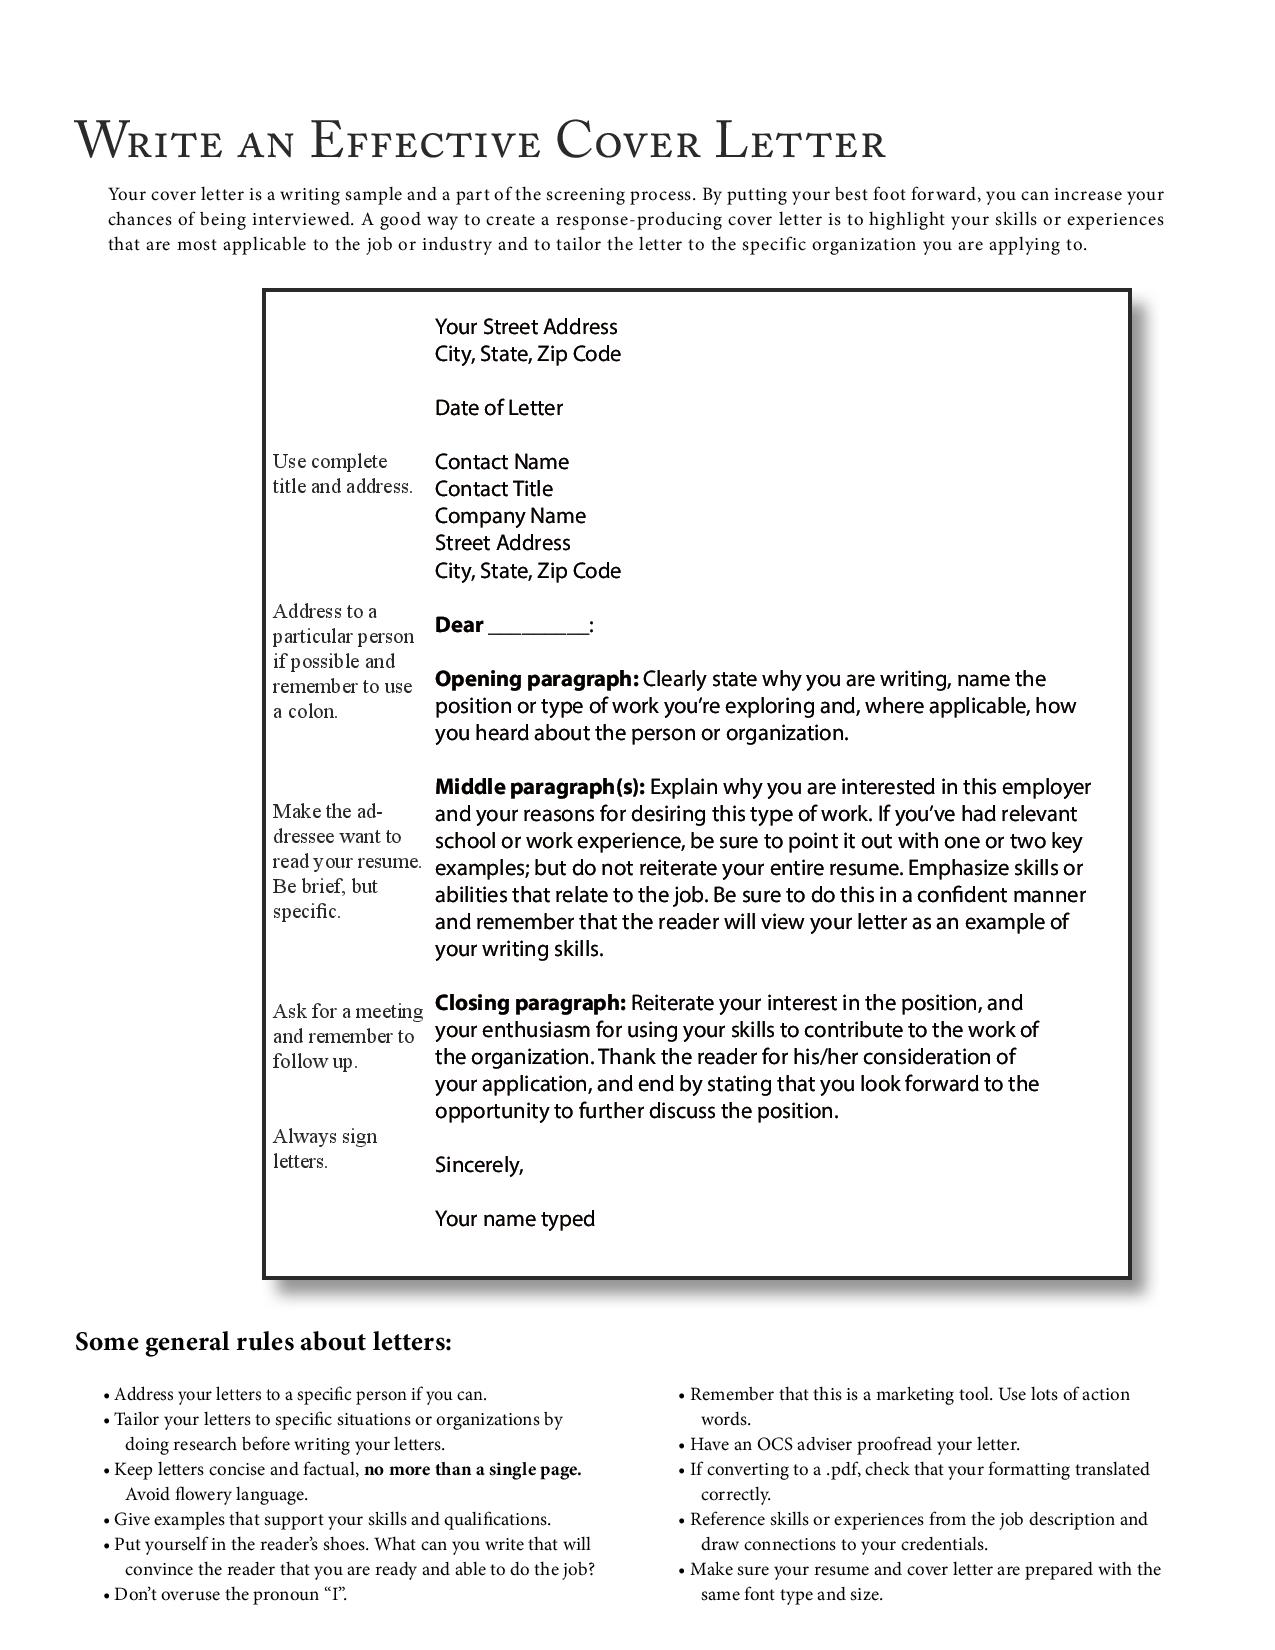 Free Resume Review Recommendations Intellectual Point